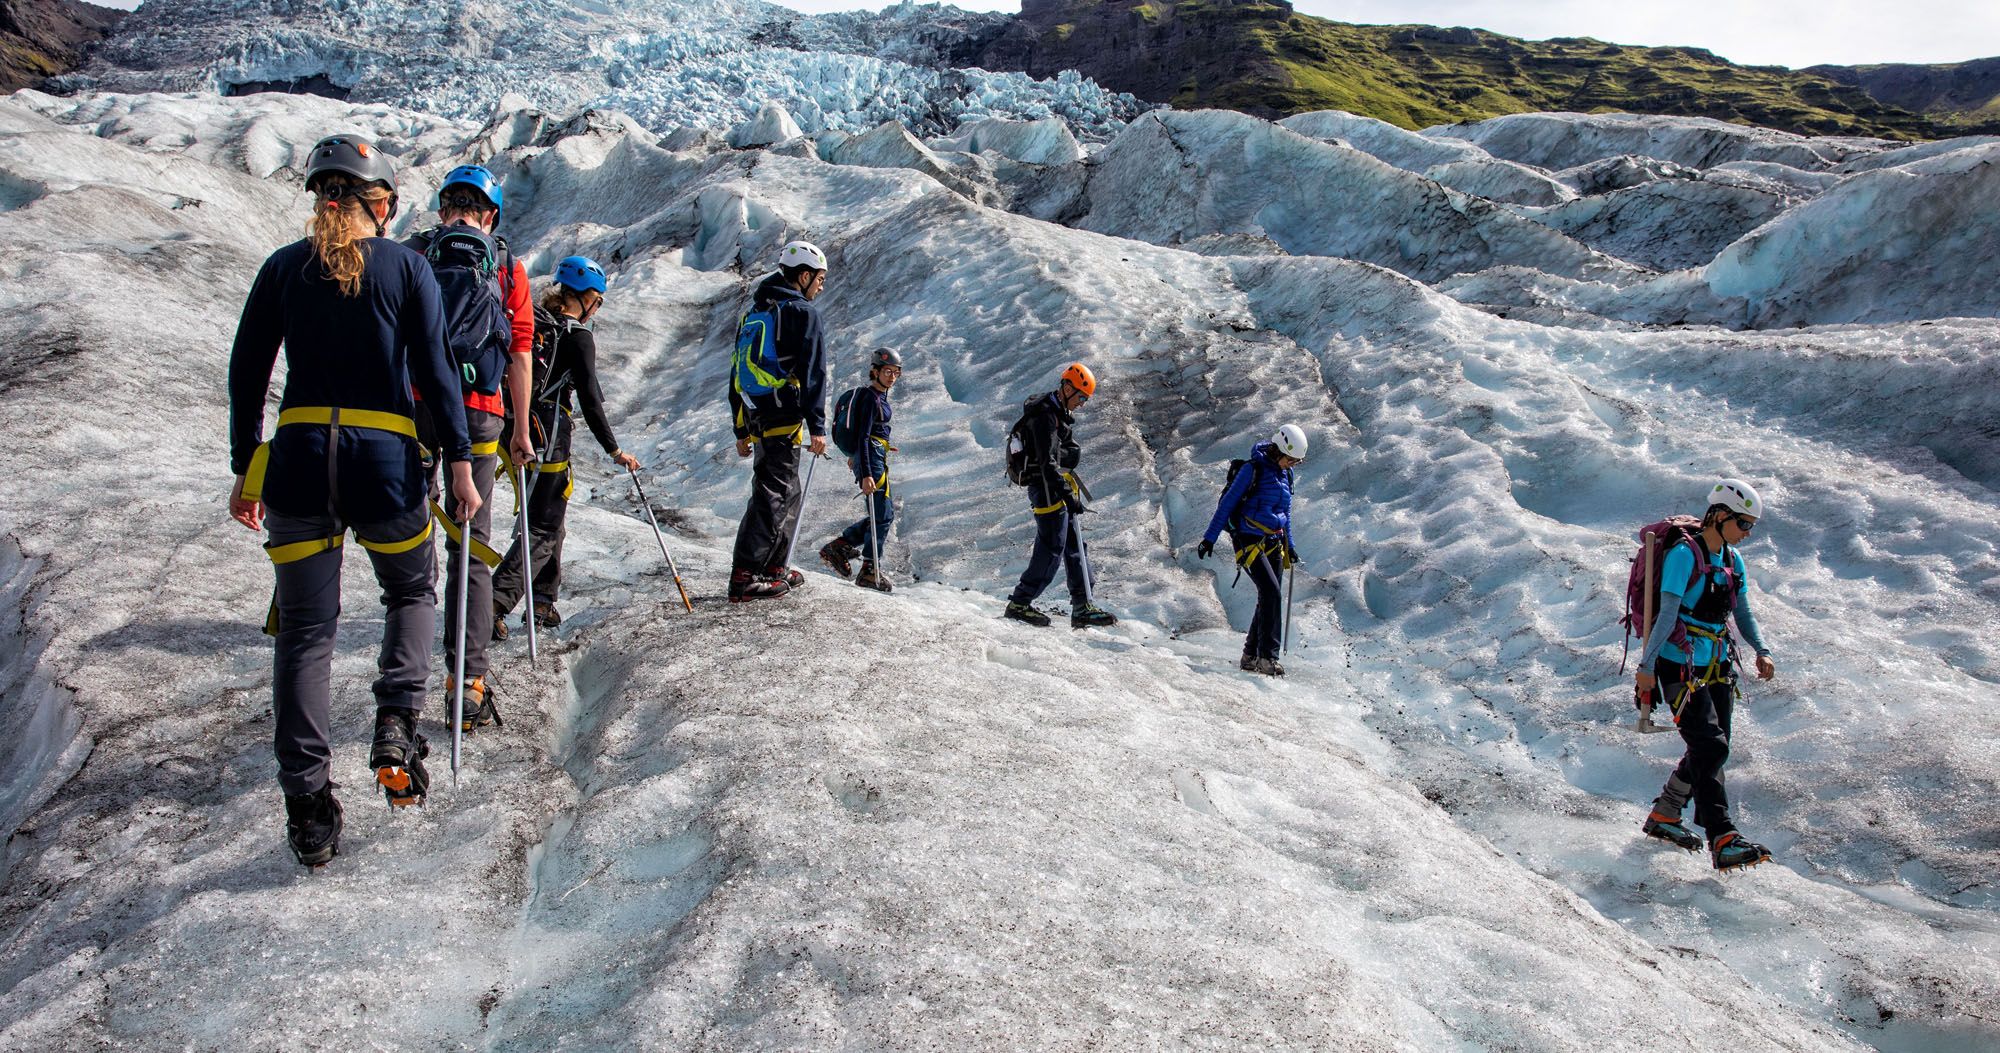 Featured image for “Best Iceland Glacier Hikes: Helpful Tips, Photos & Tour Options”